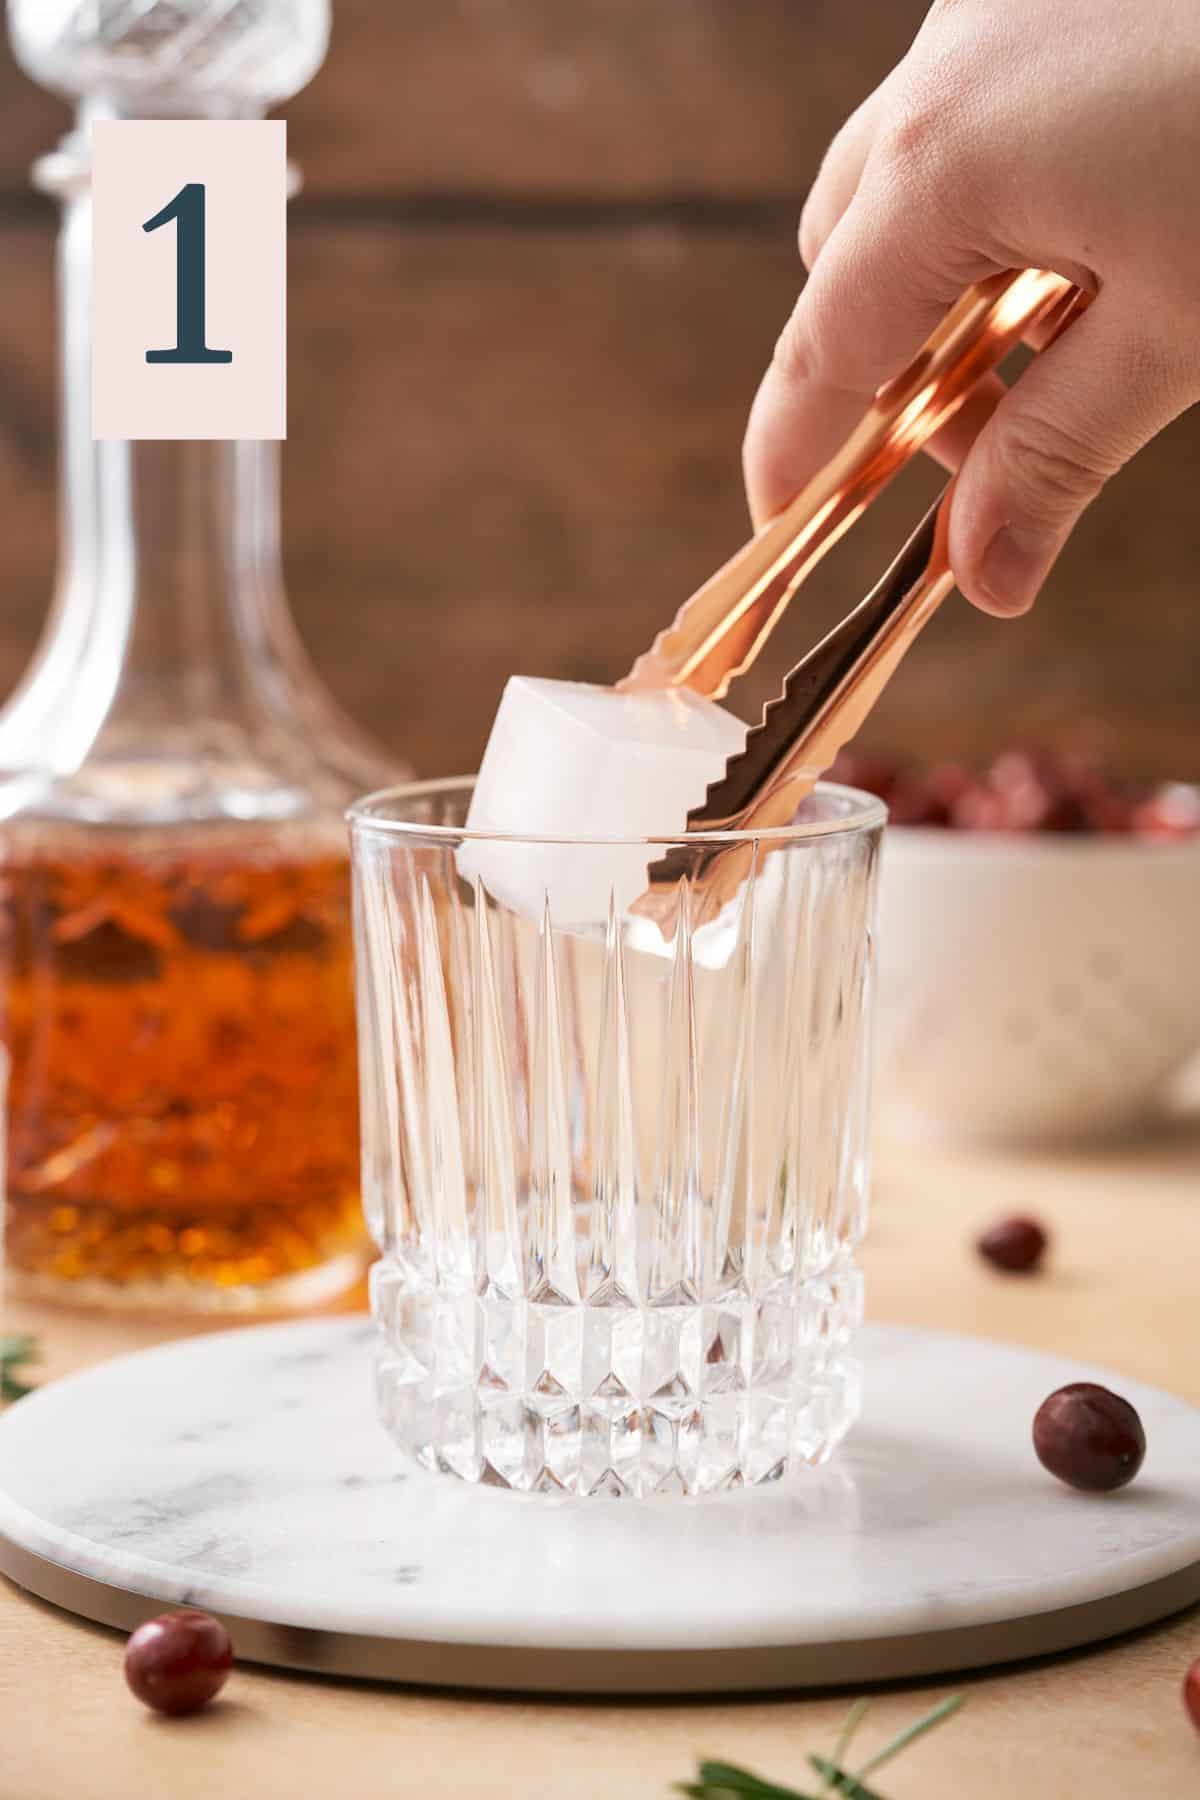 Hand using an ice tongs to place a large square ice cube into a rocks glass, with bourbon and cranberries in the background.